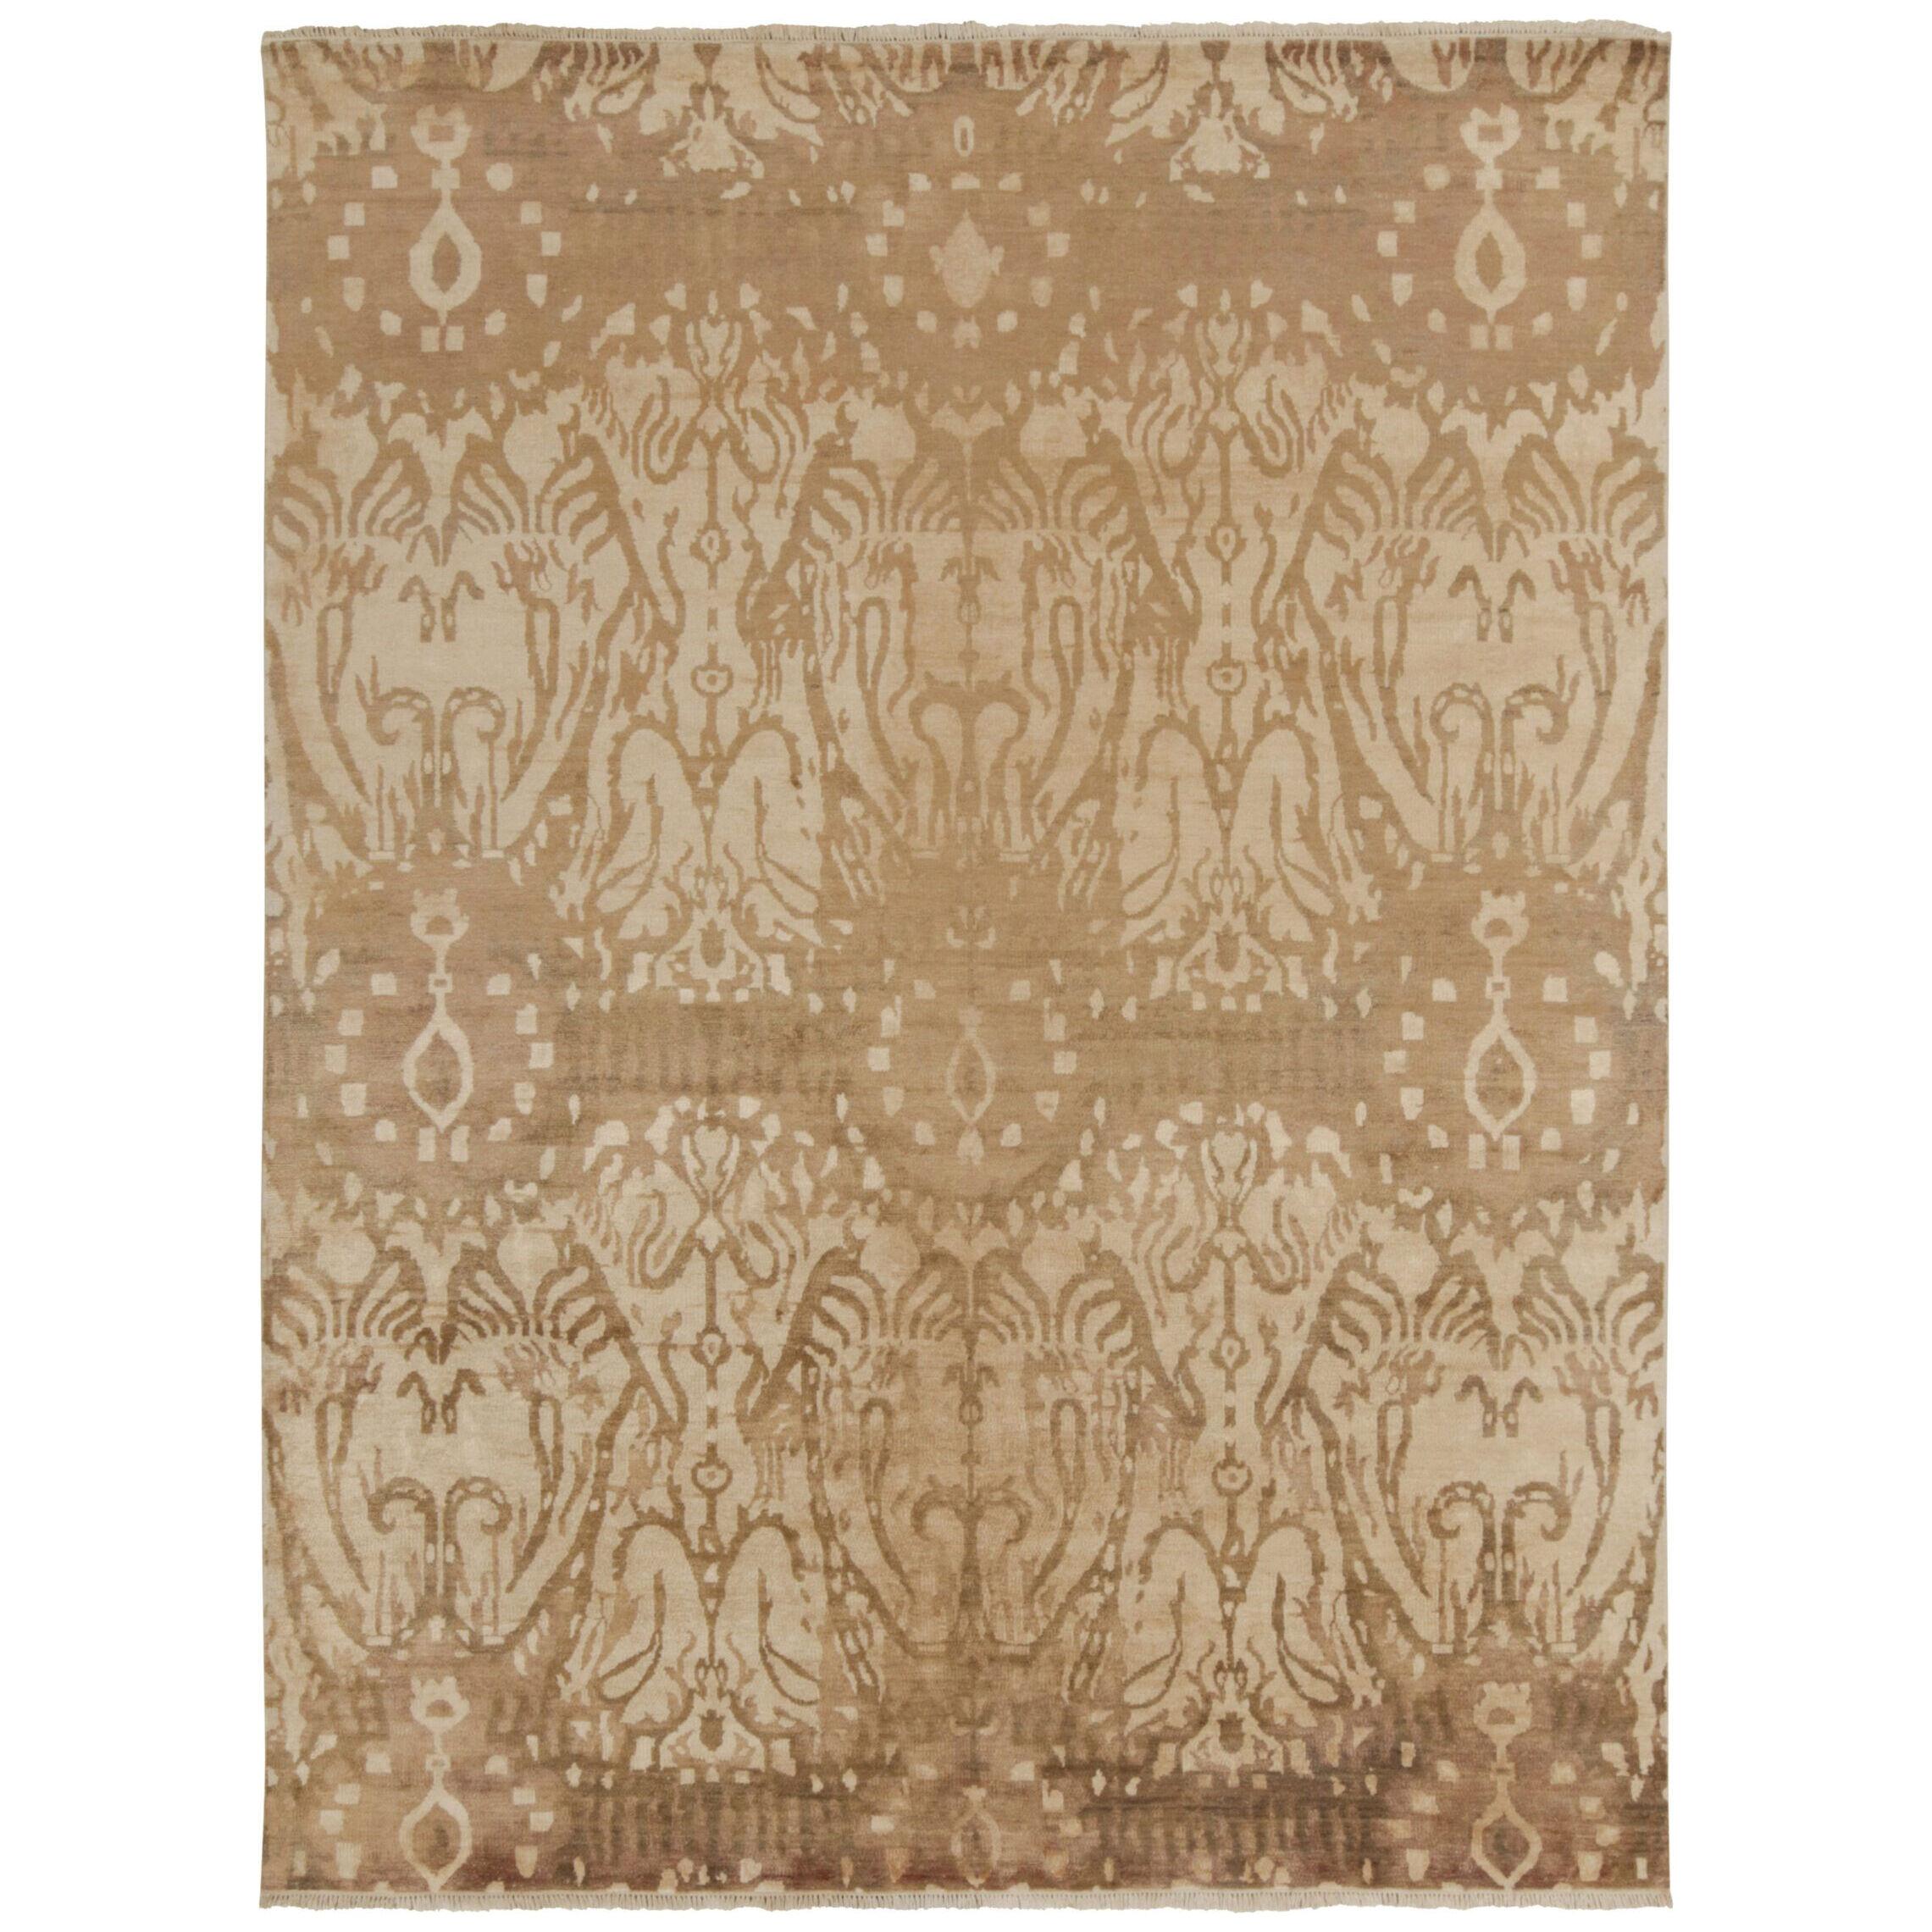 Rug & Kilim’s Classic-Style Contemporary Rug in Beige-Brown Ikats Patterns